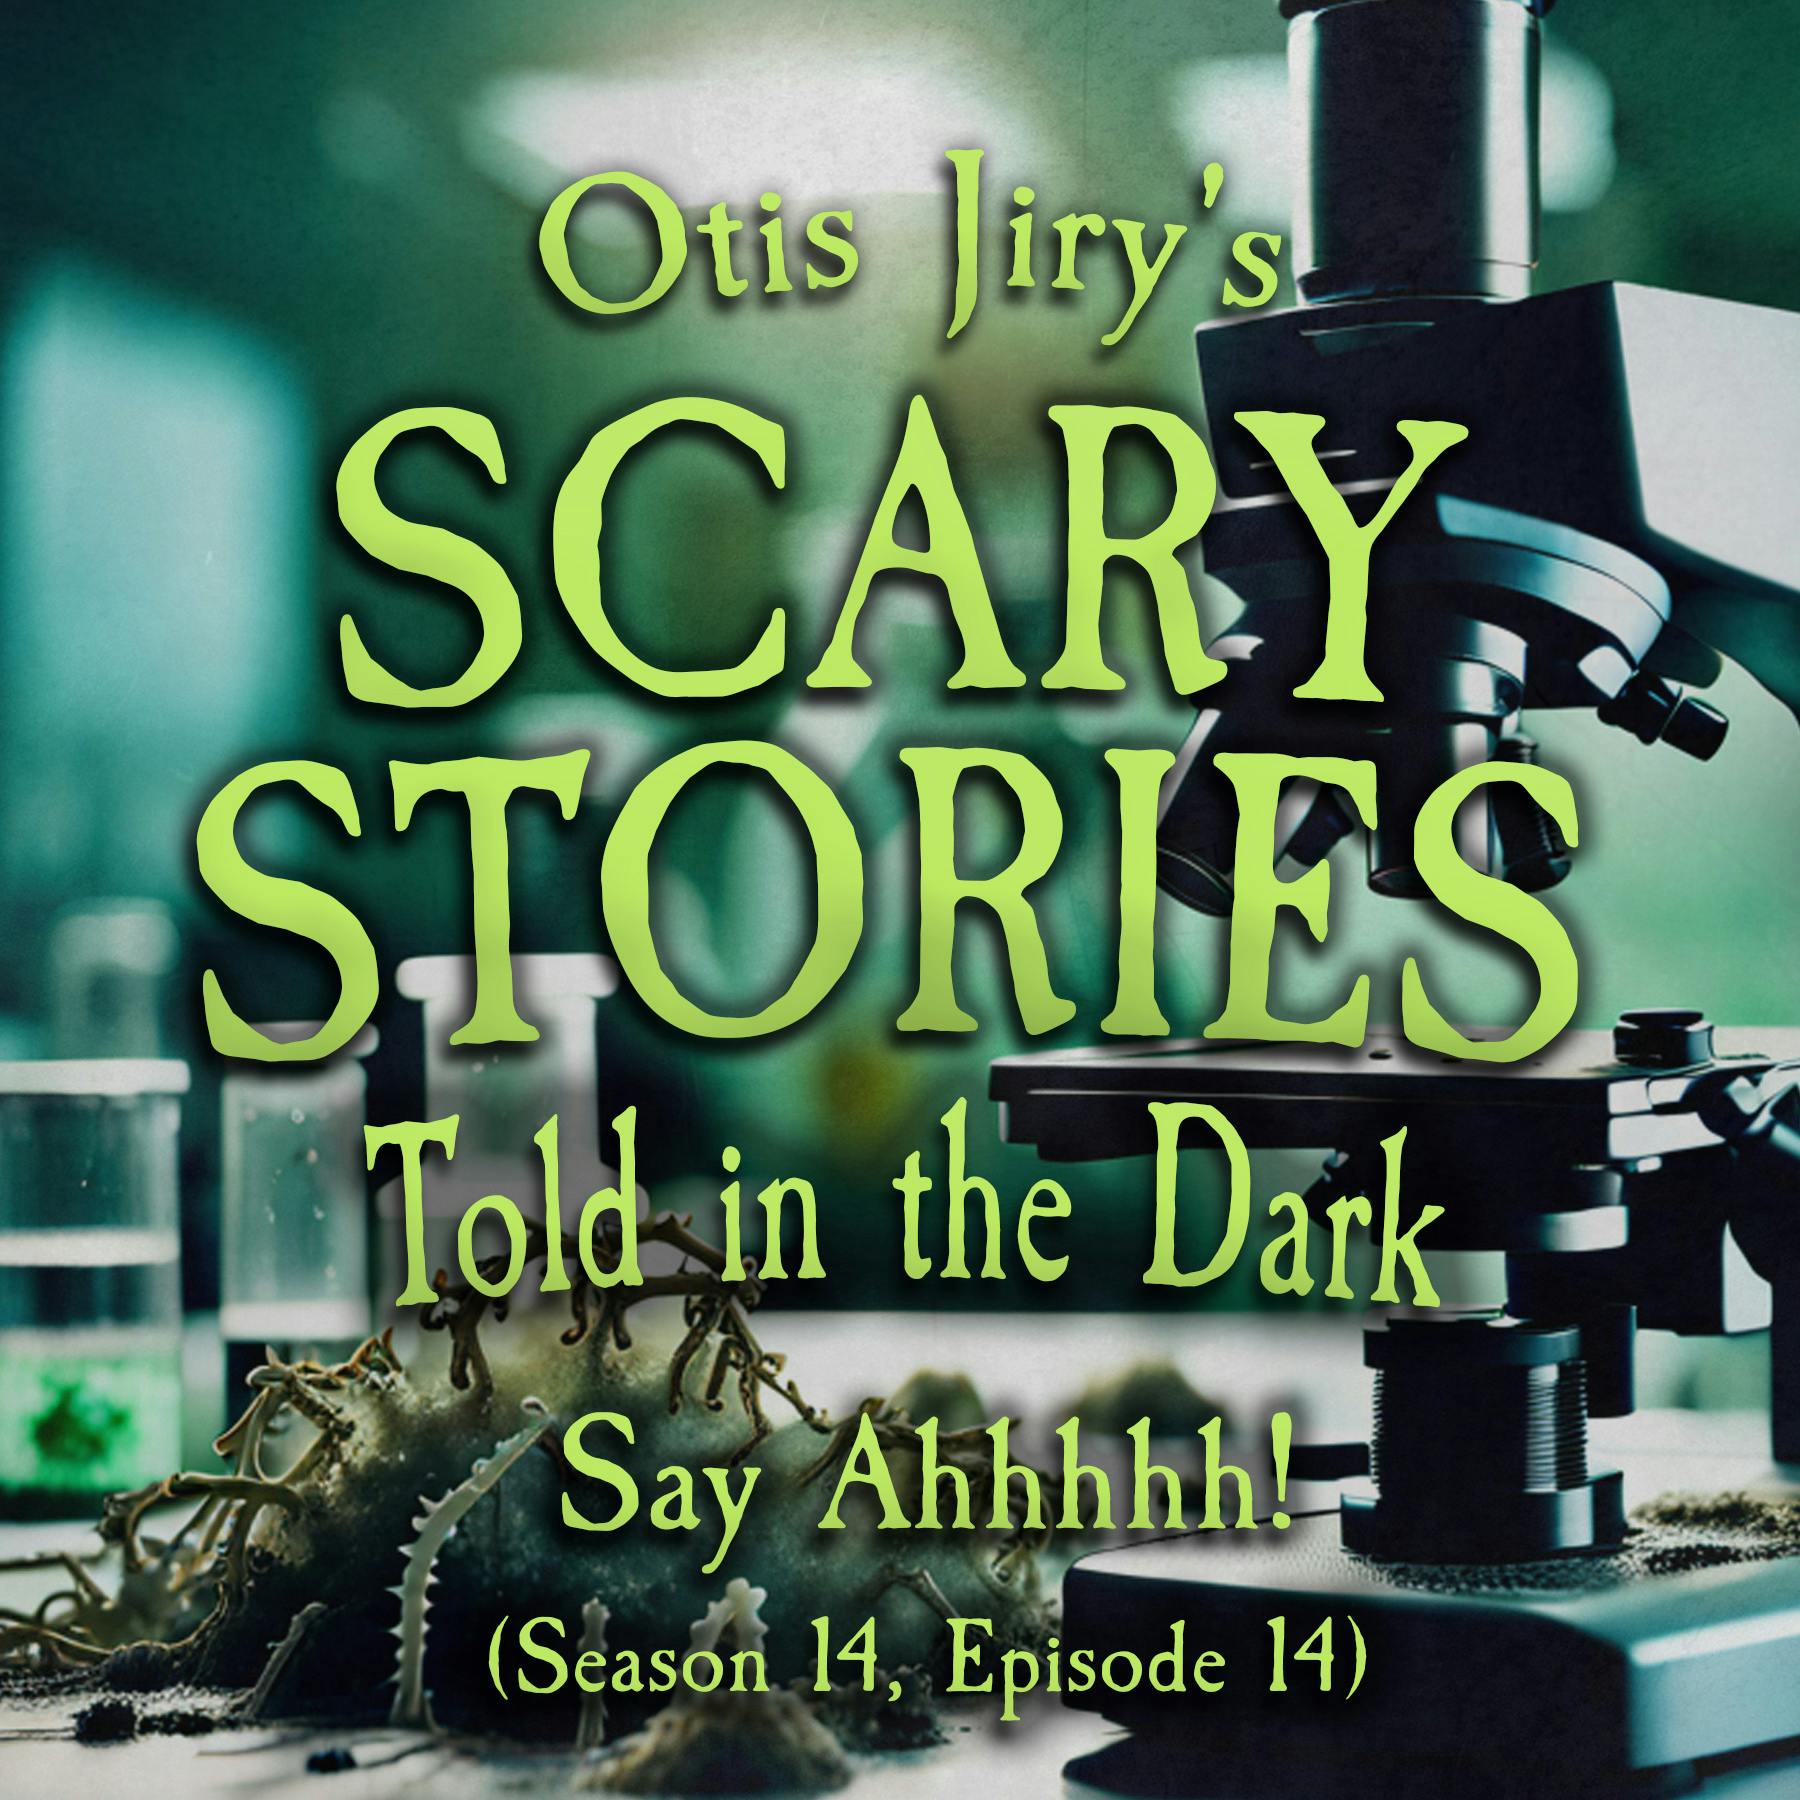 S14E14 - ”Say Ahhhhhh!” – Scary Stories Told in the Dark